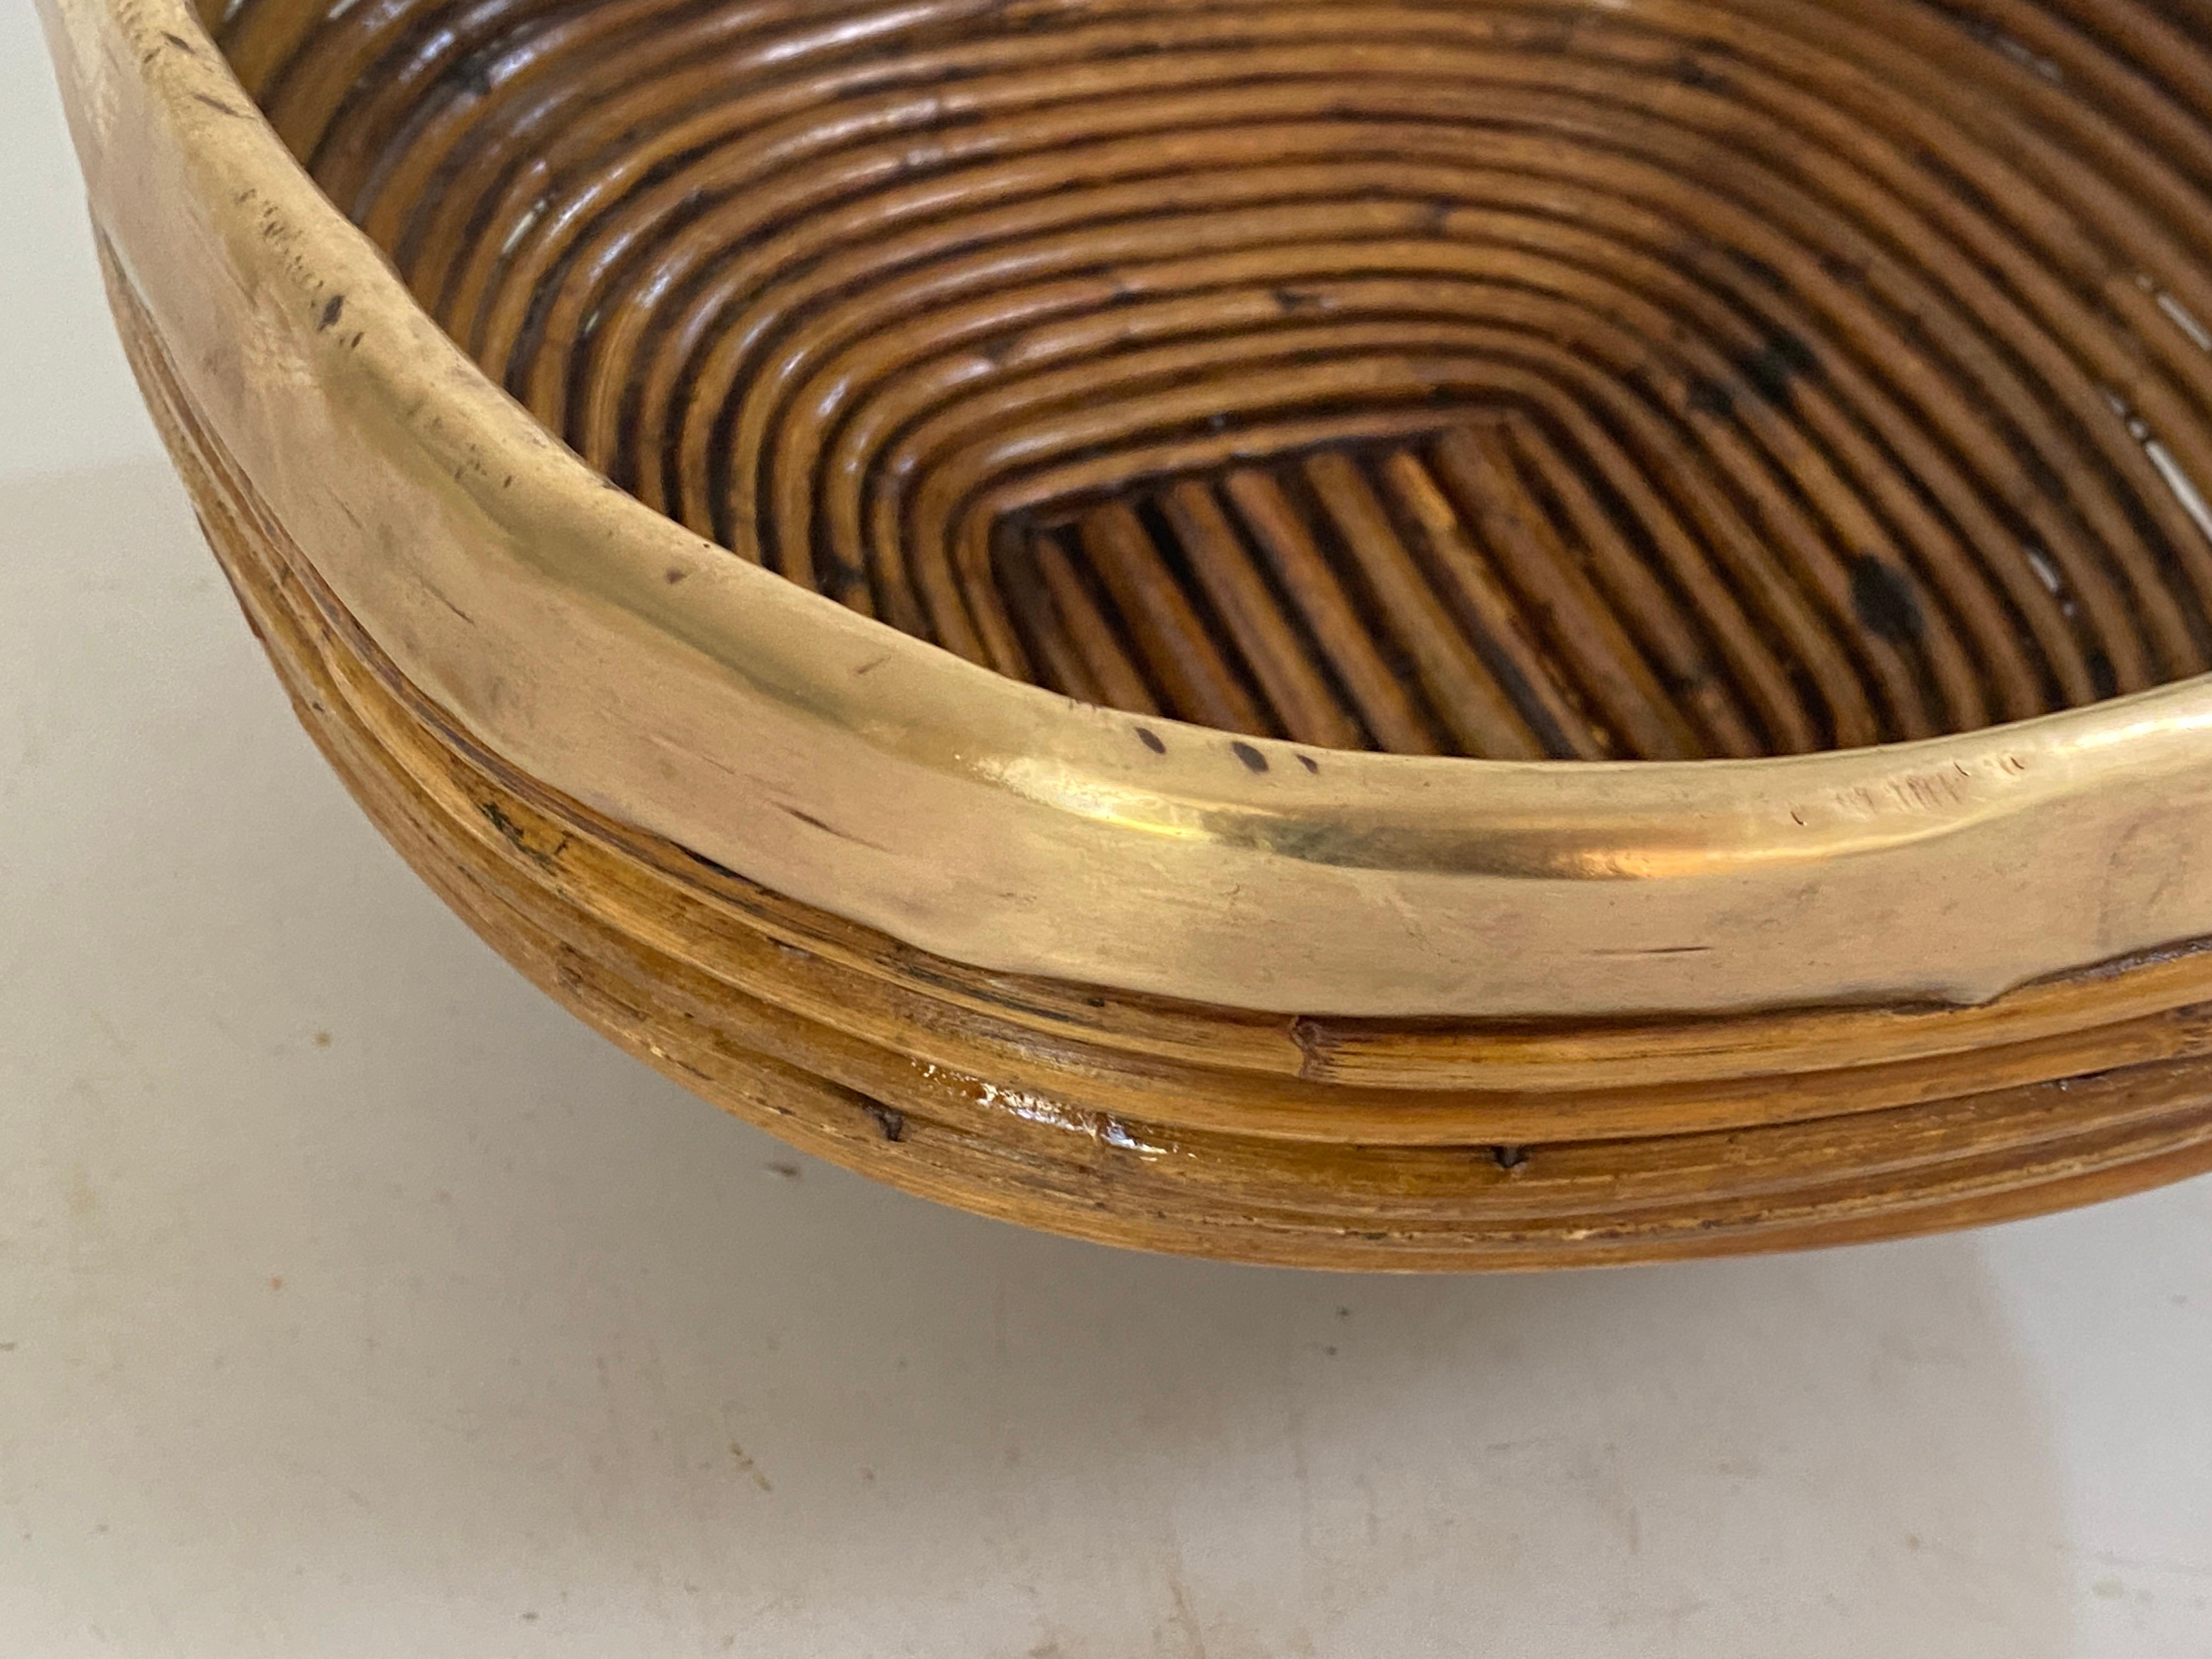 Rattan and Brass Italian Large Basket Bowl Centerpiece, 1970s Crespi Style For Sale 6